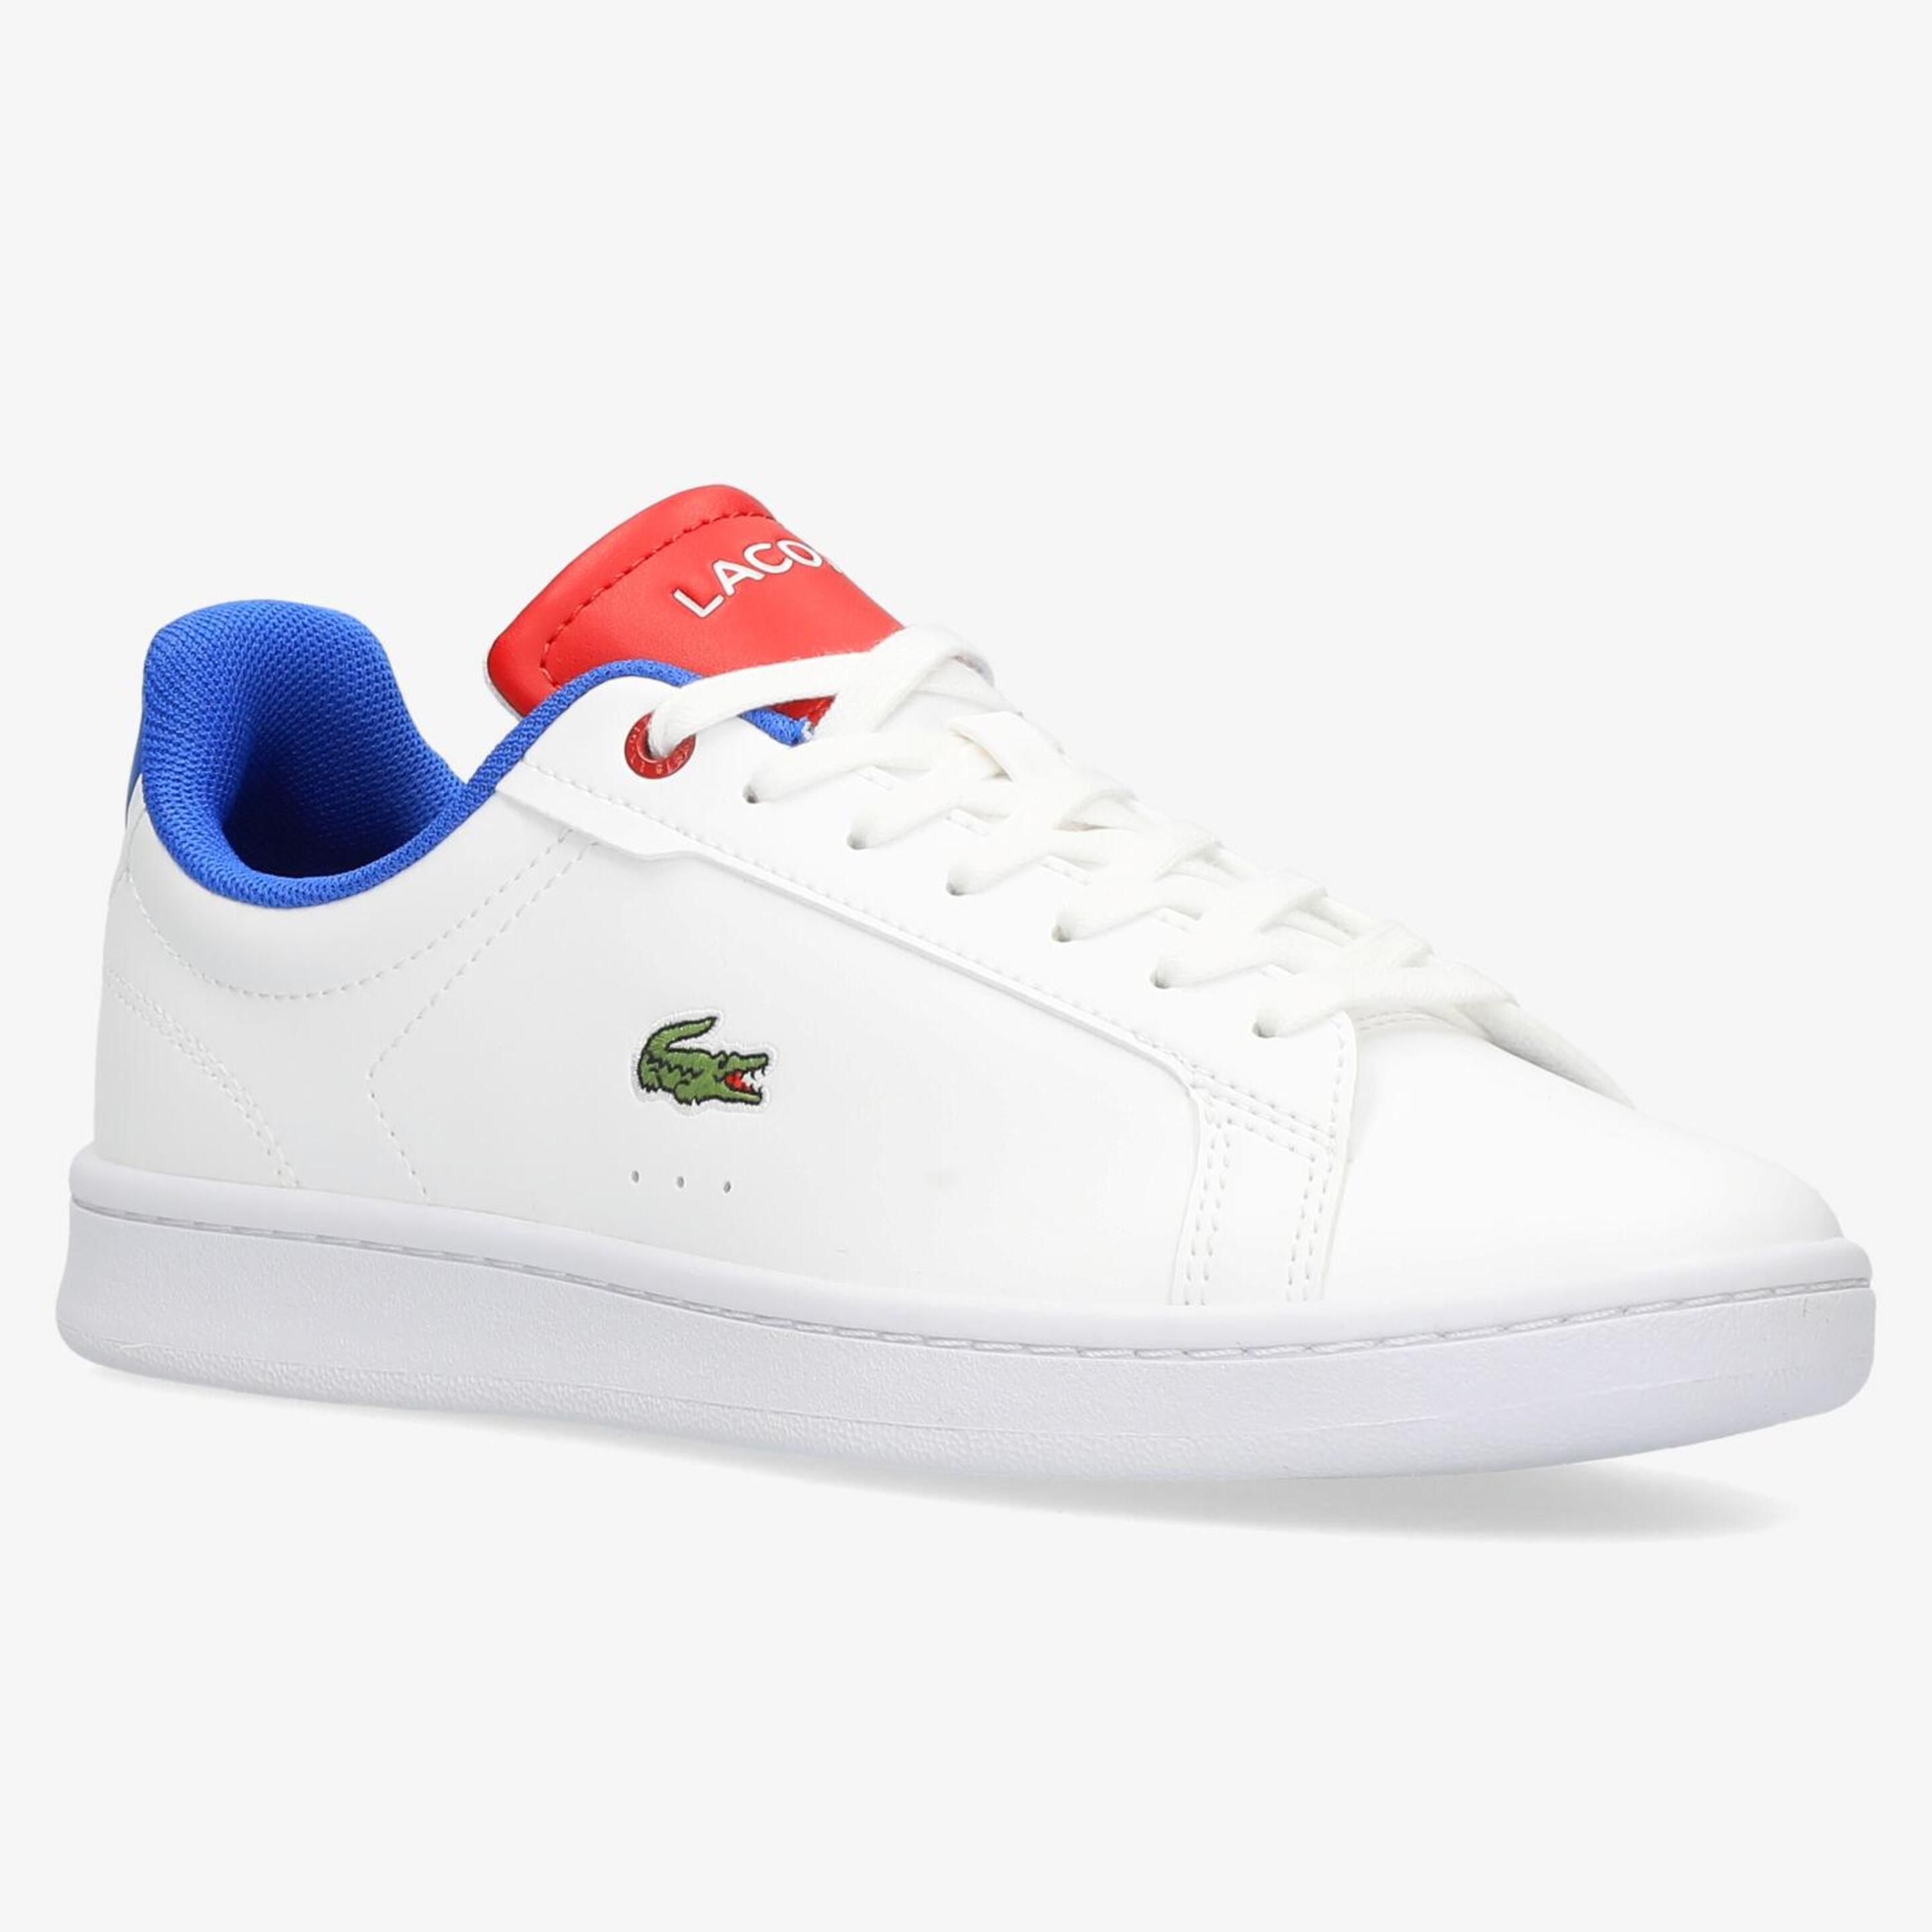 Lacoste Carnaby Pro